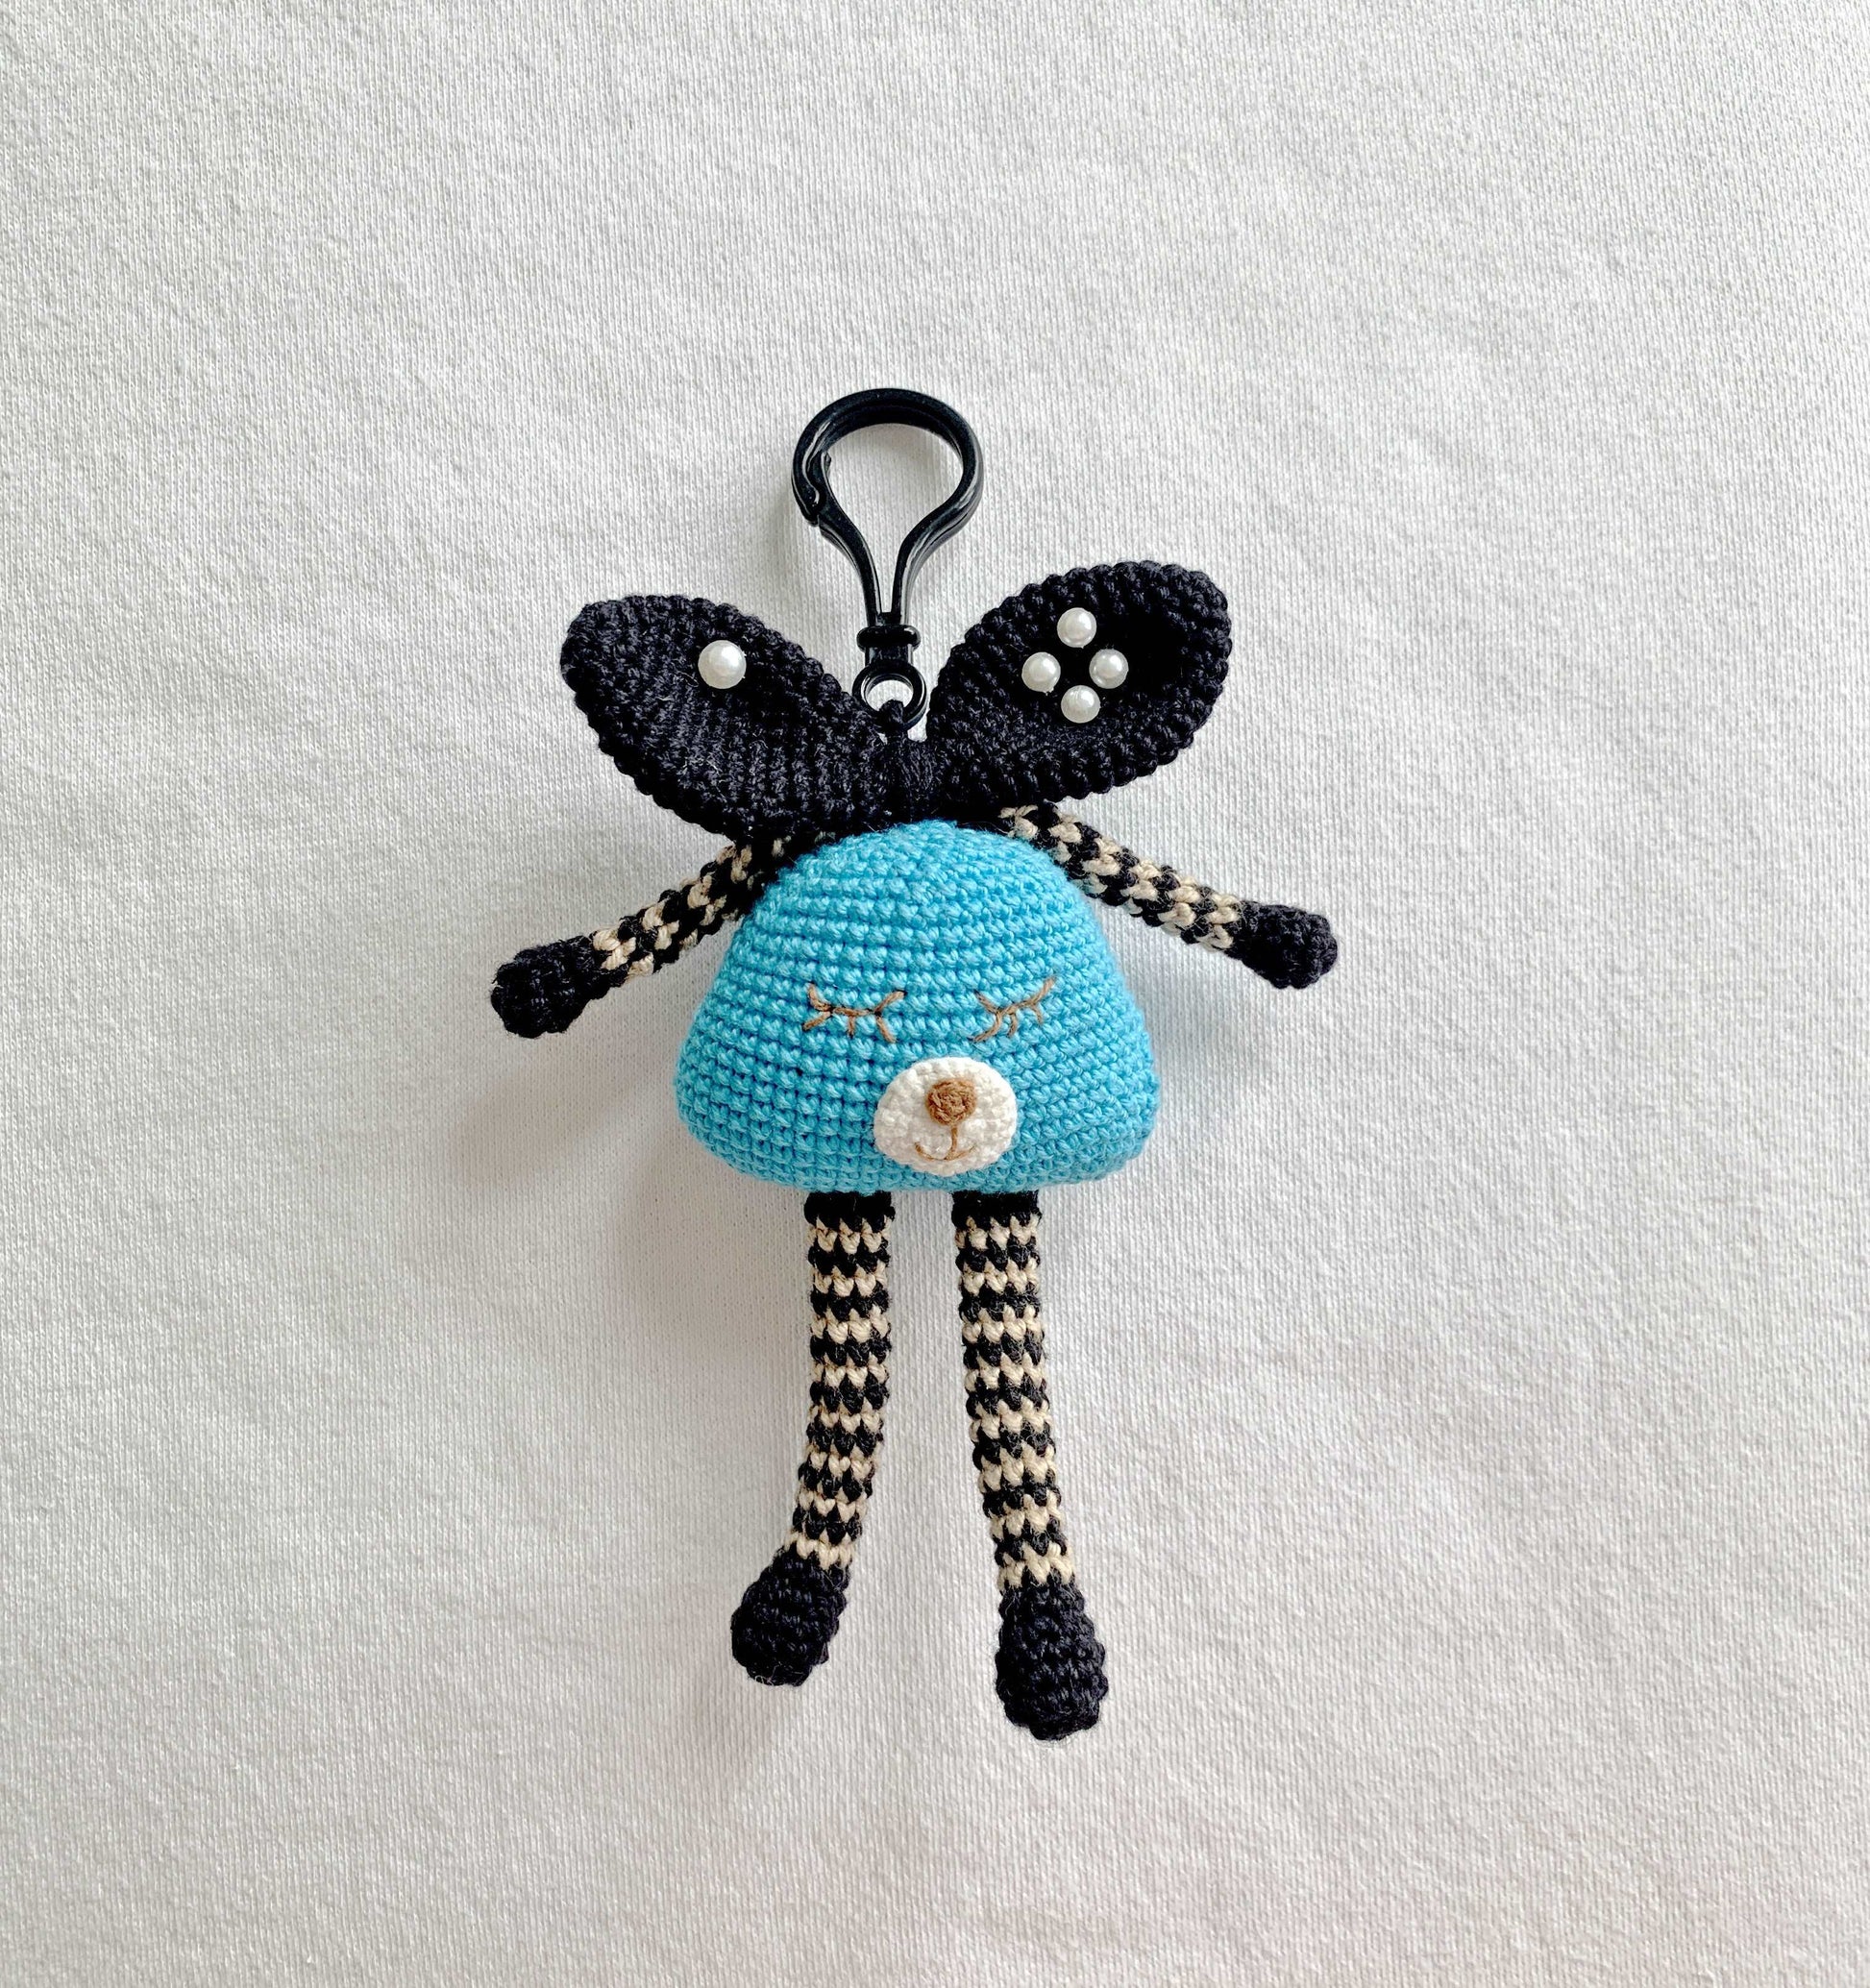 Artisan Crafted Crochet Figurine Charm for Accessories